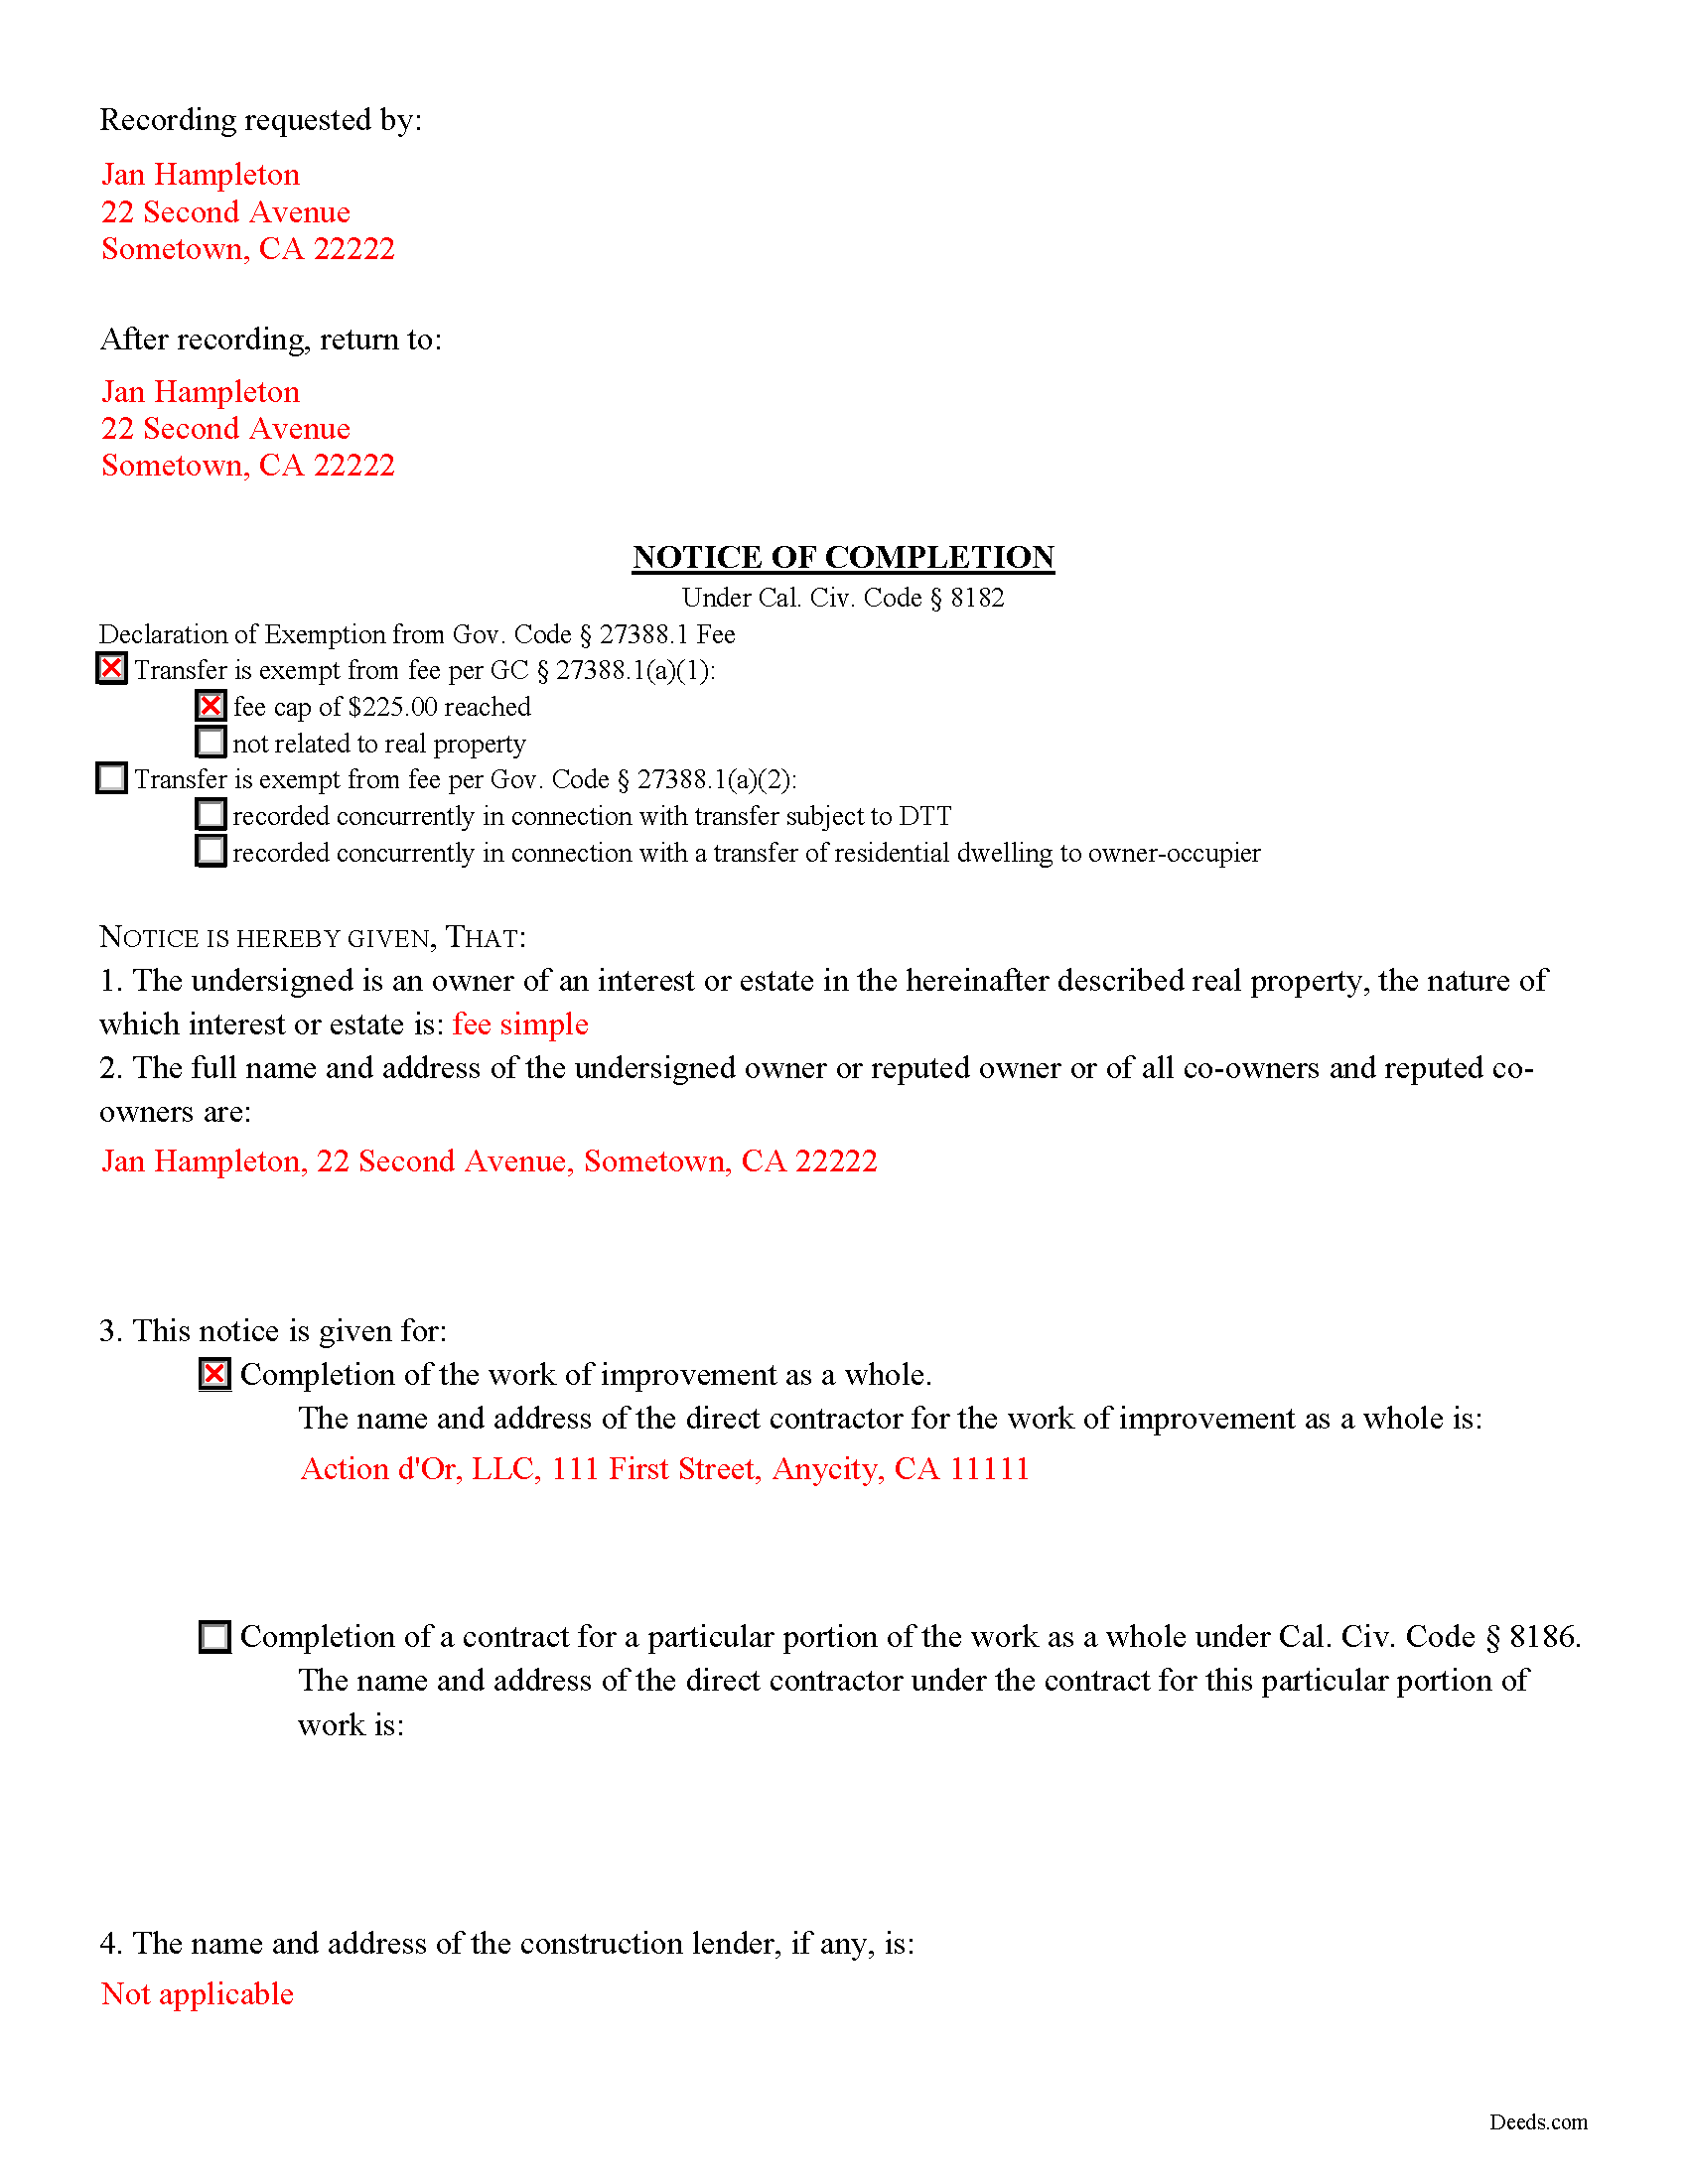 Completed Example of the Notice of Completion Document